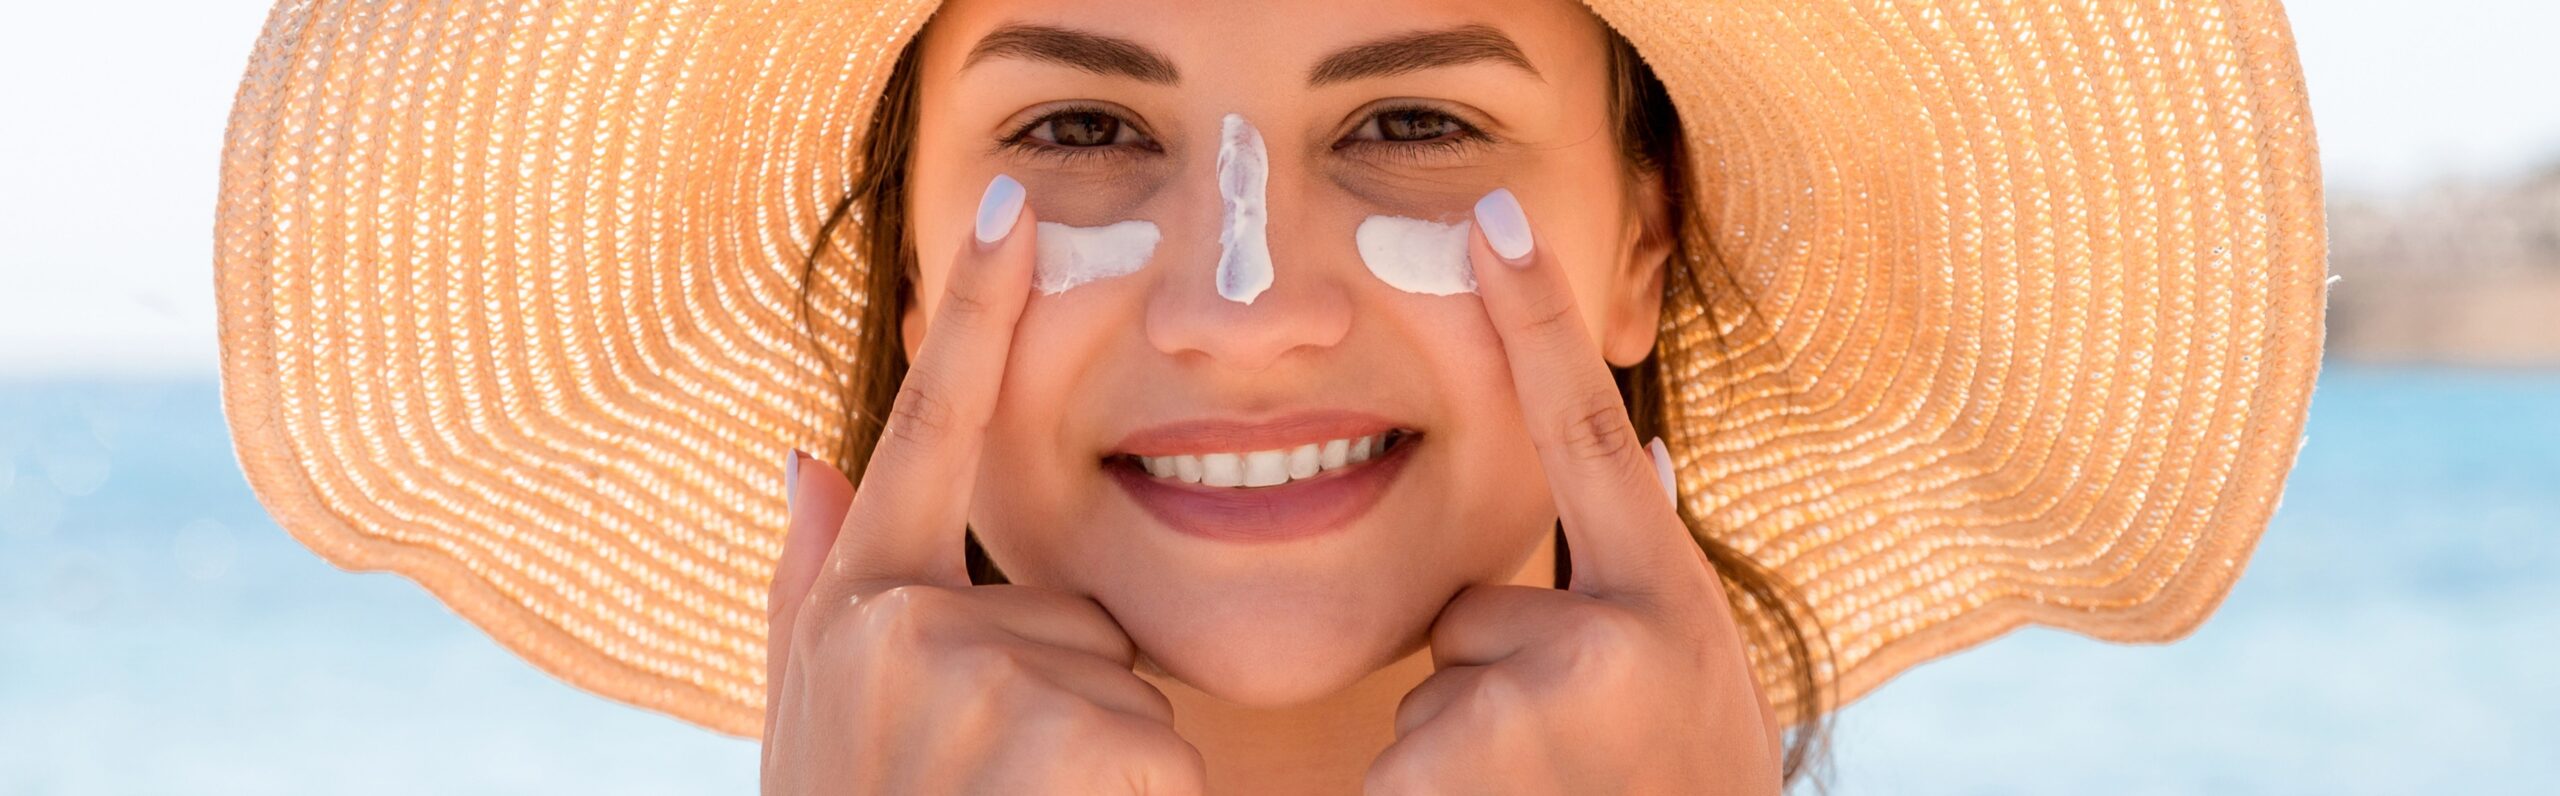 Woman smiling while applying sunscreen with UV filters to her face